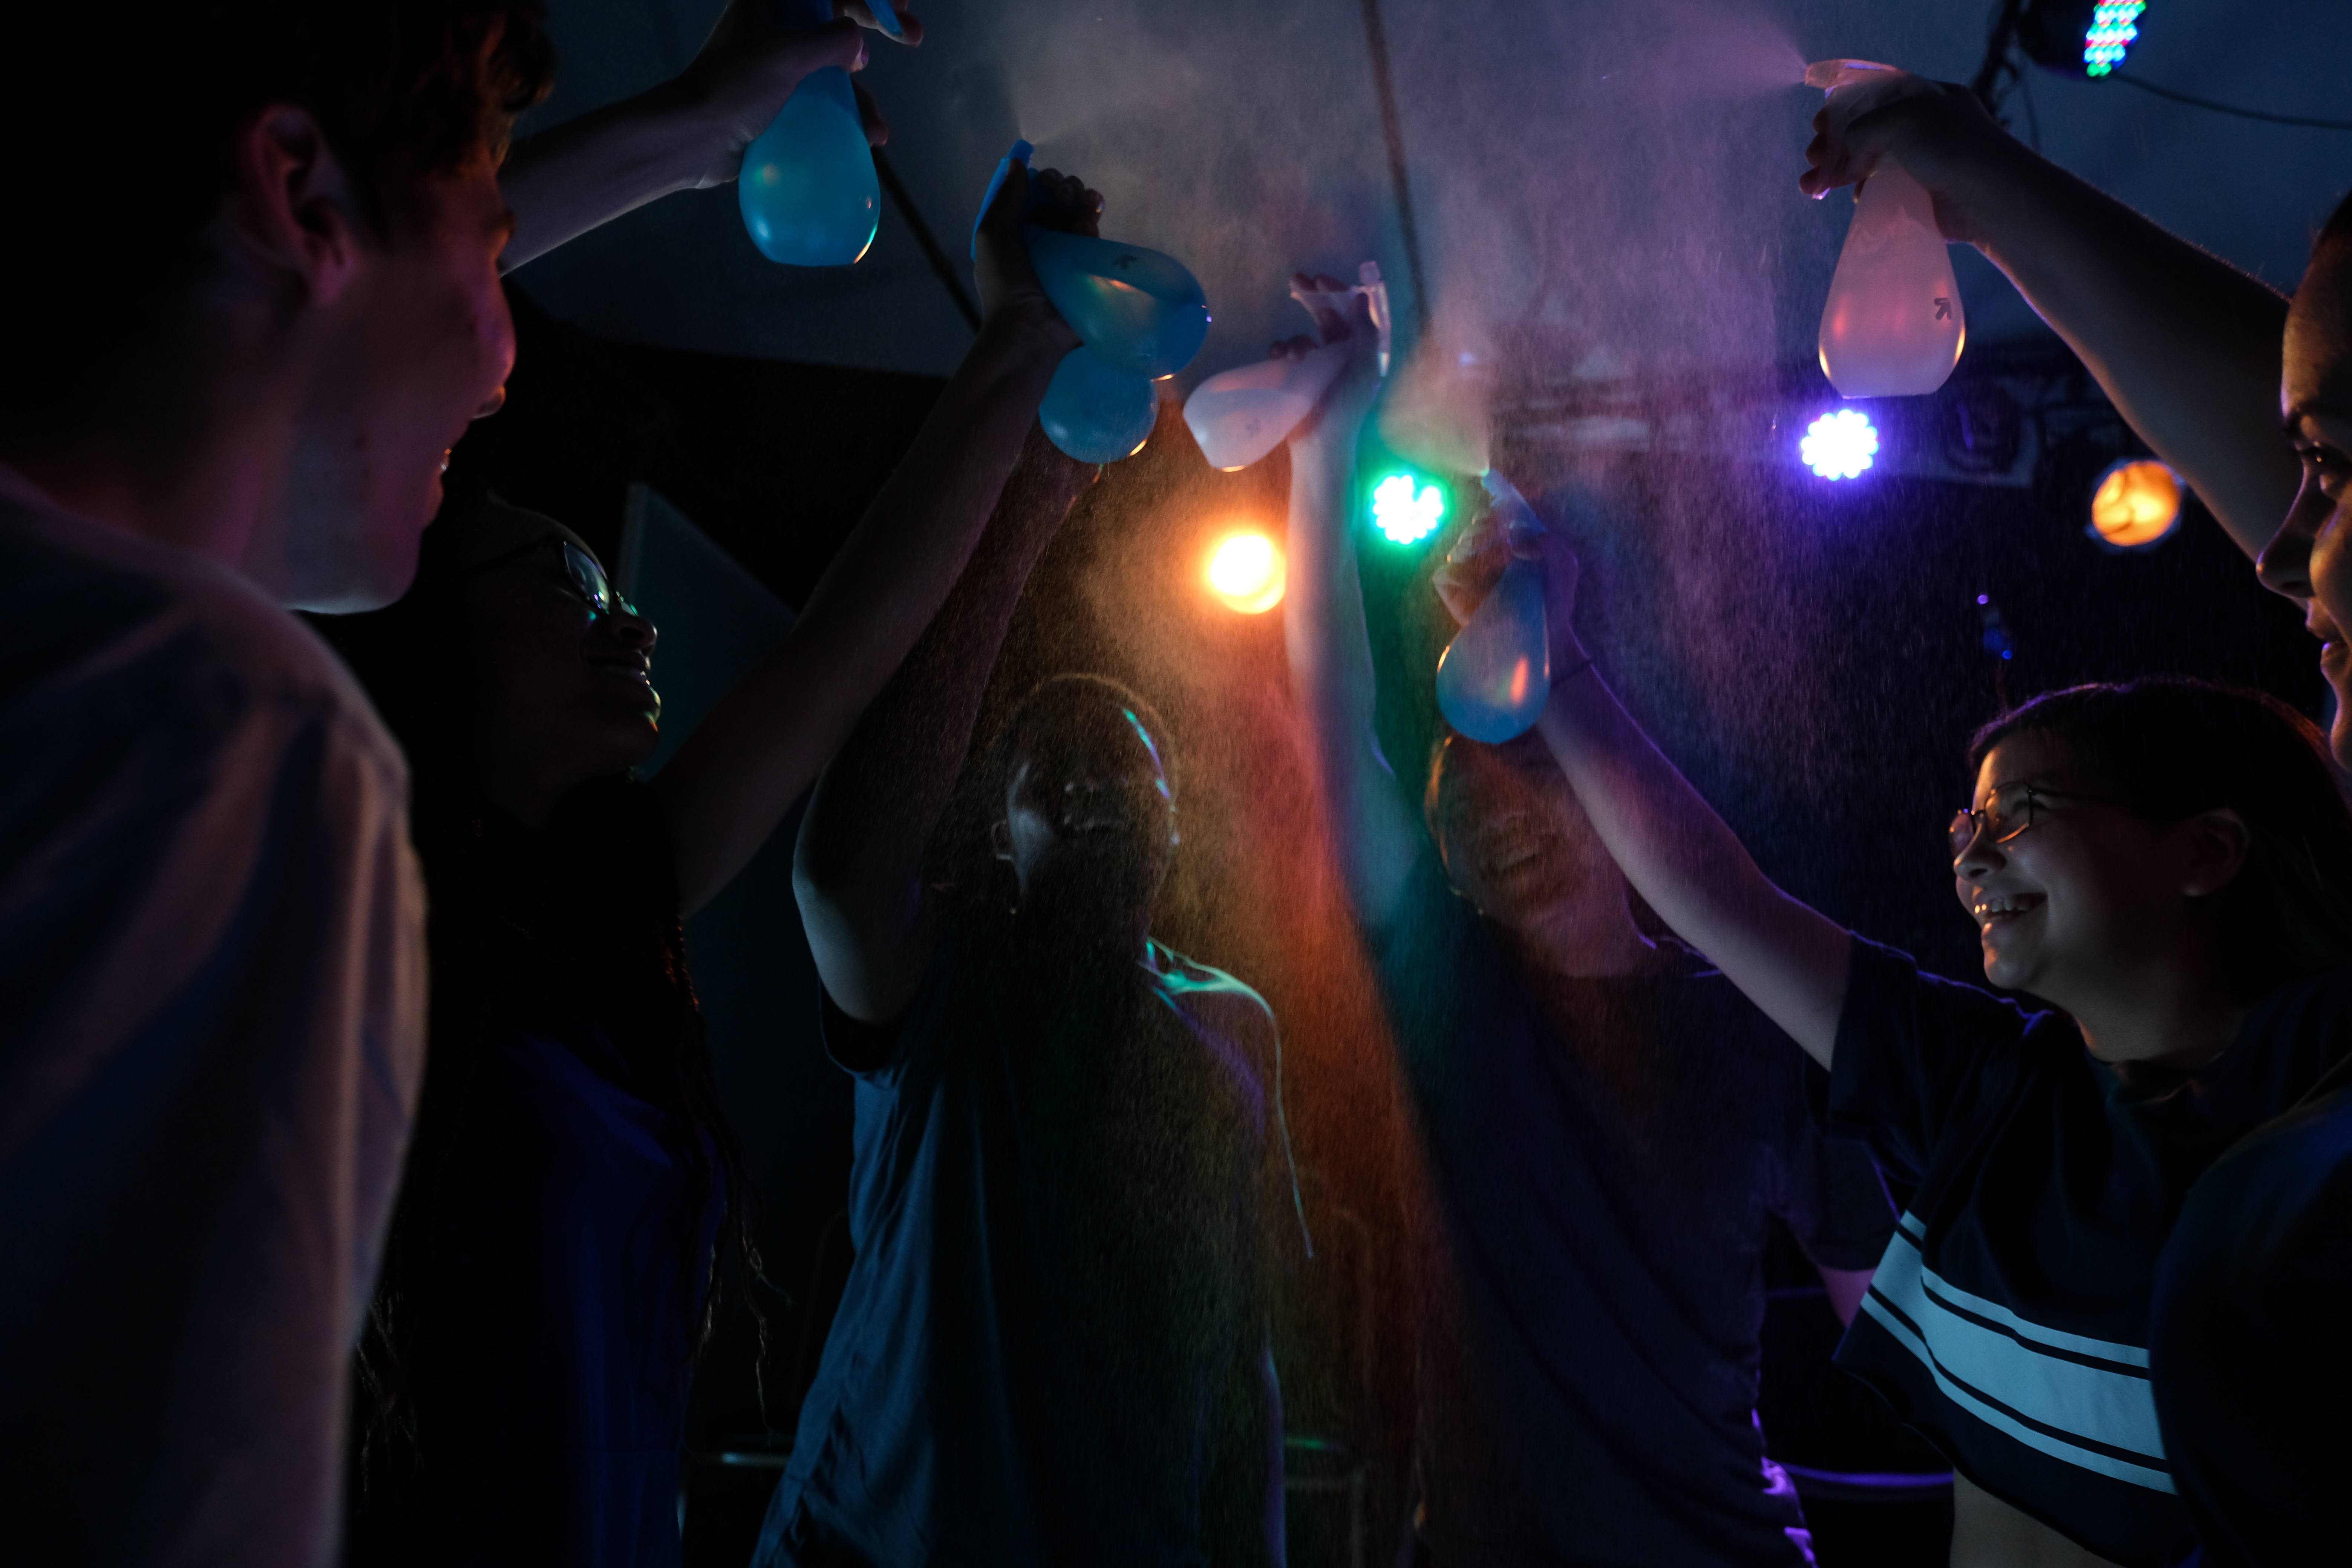 Image: Six youth performers of "Parched" circle and face in towards each other. Their arms extended and holding water bottles, they spritz the air. An orange, green, purple, and yellow lightbulb strung in the air behind them. Image courtesy of Joel Maisonet